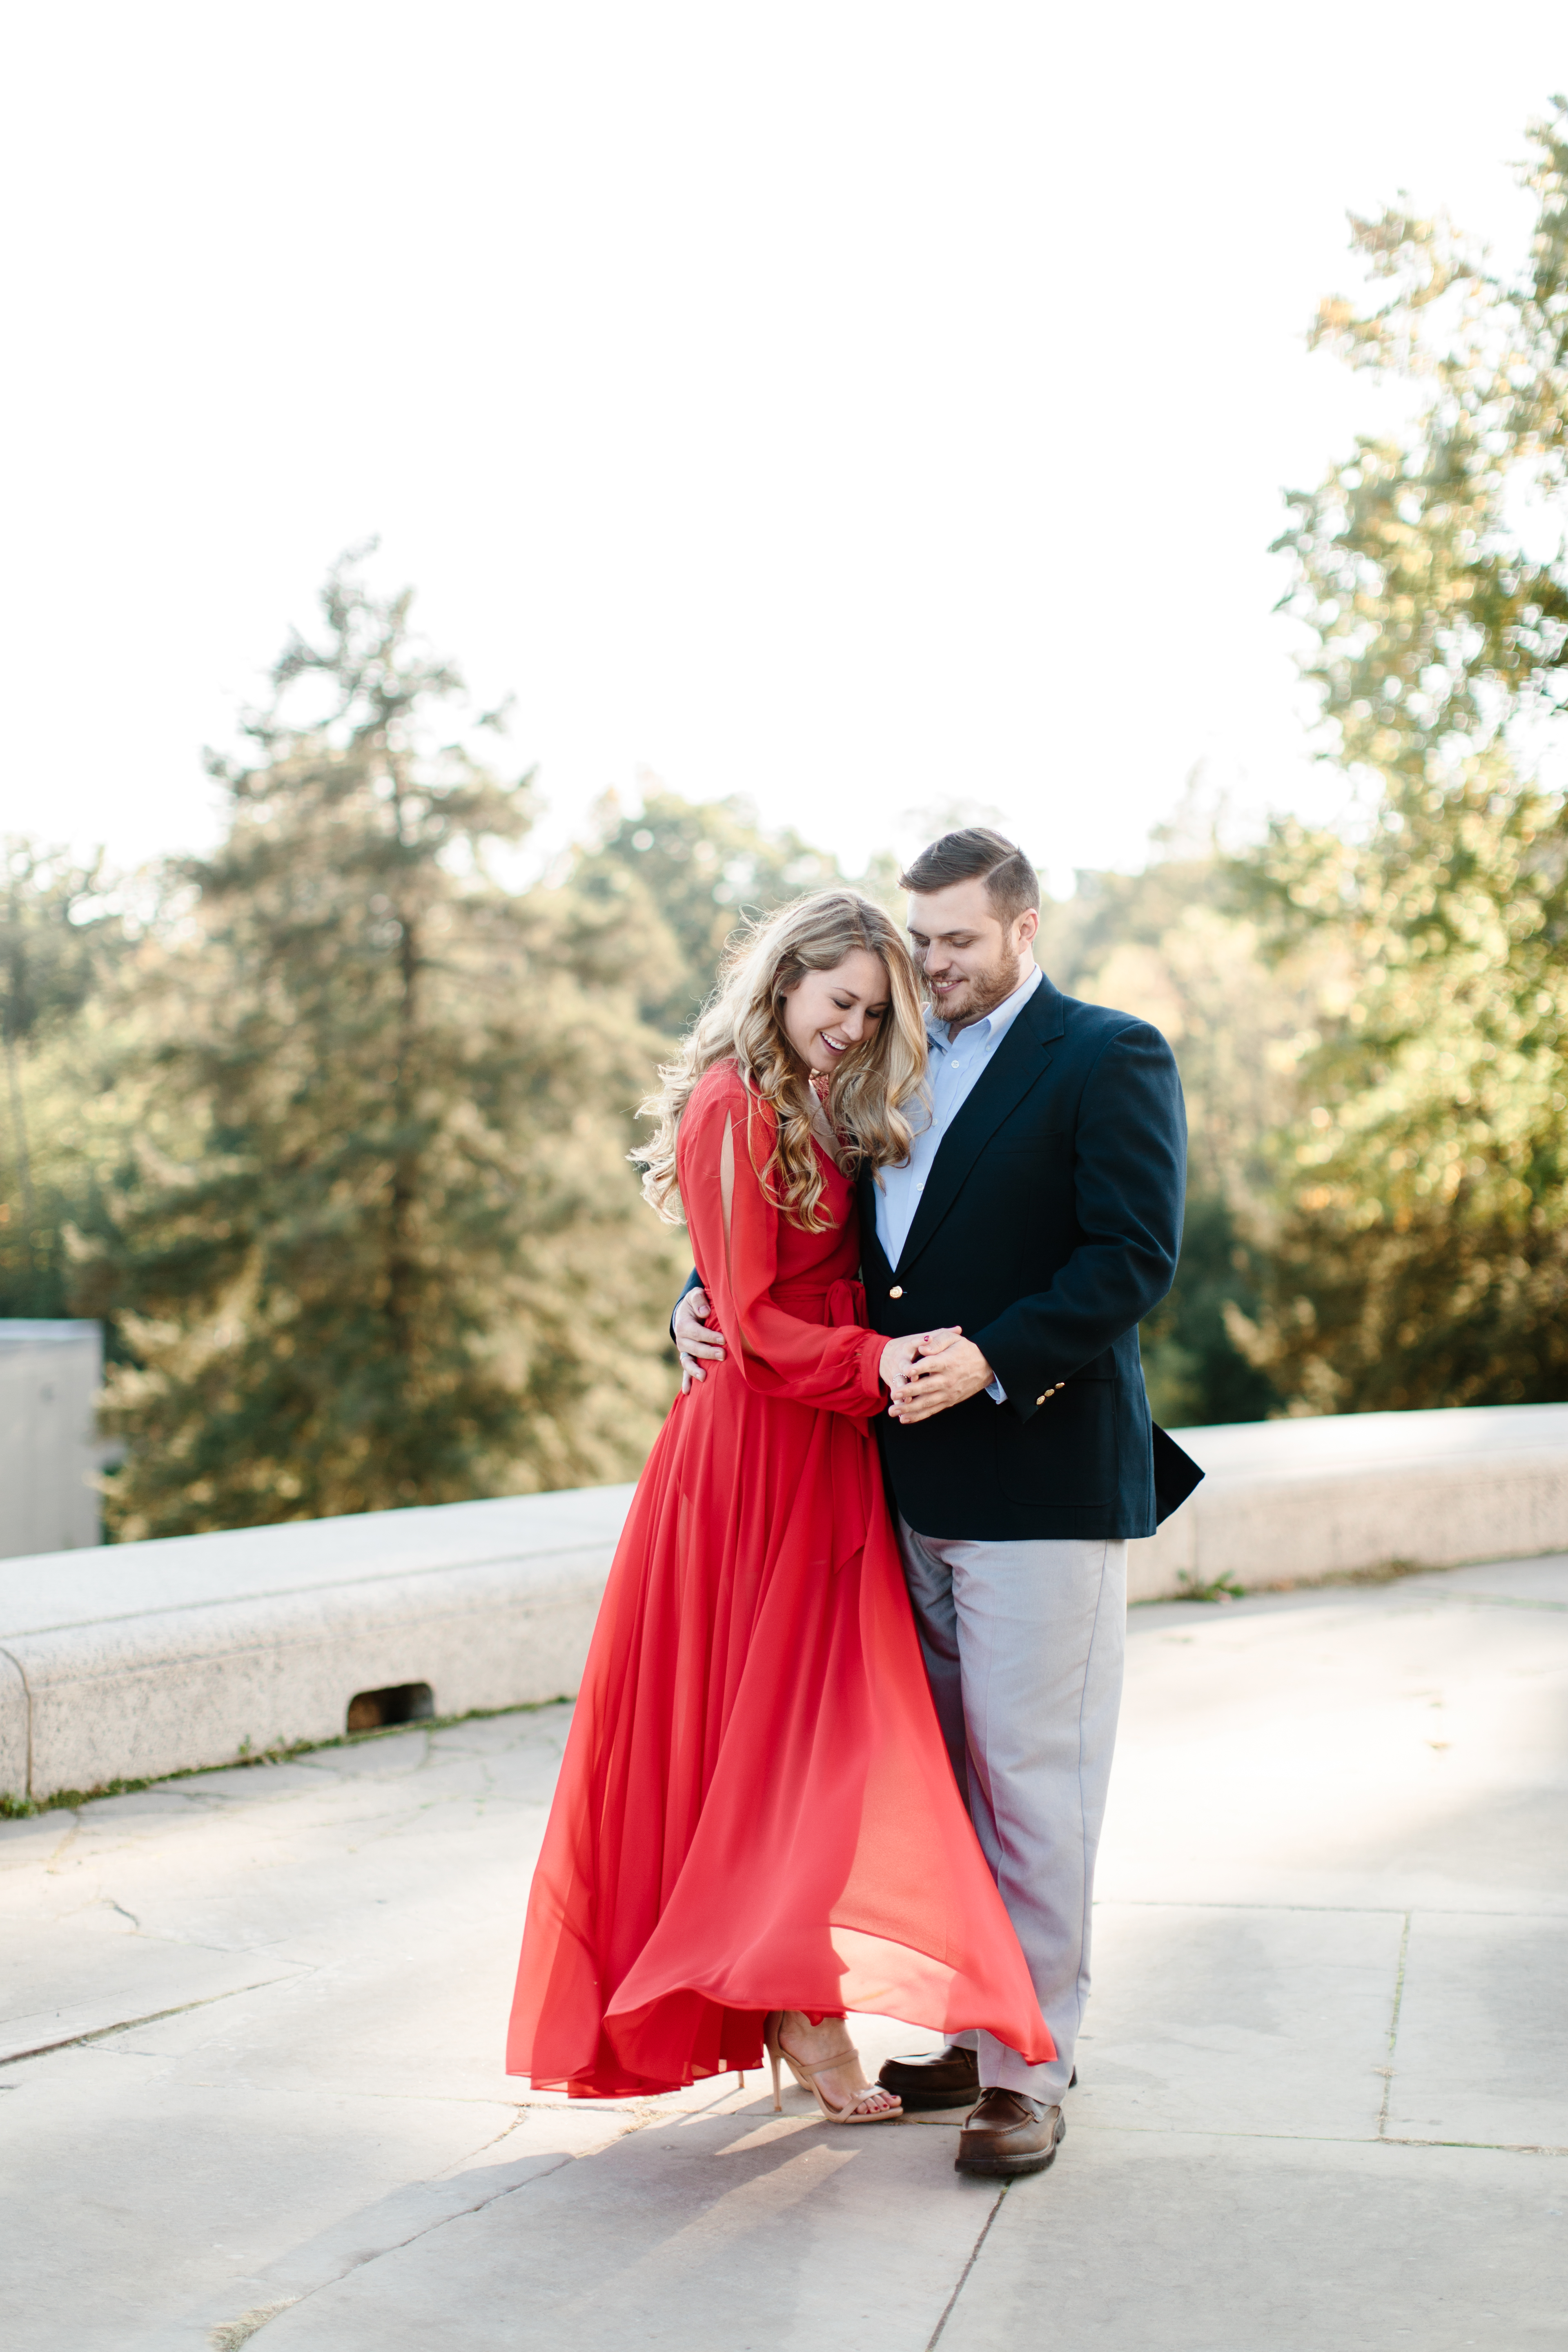 Romantic Cleveland engagement session in red